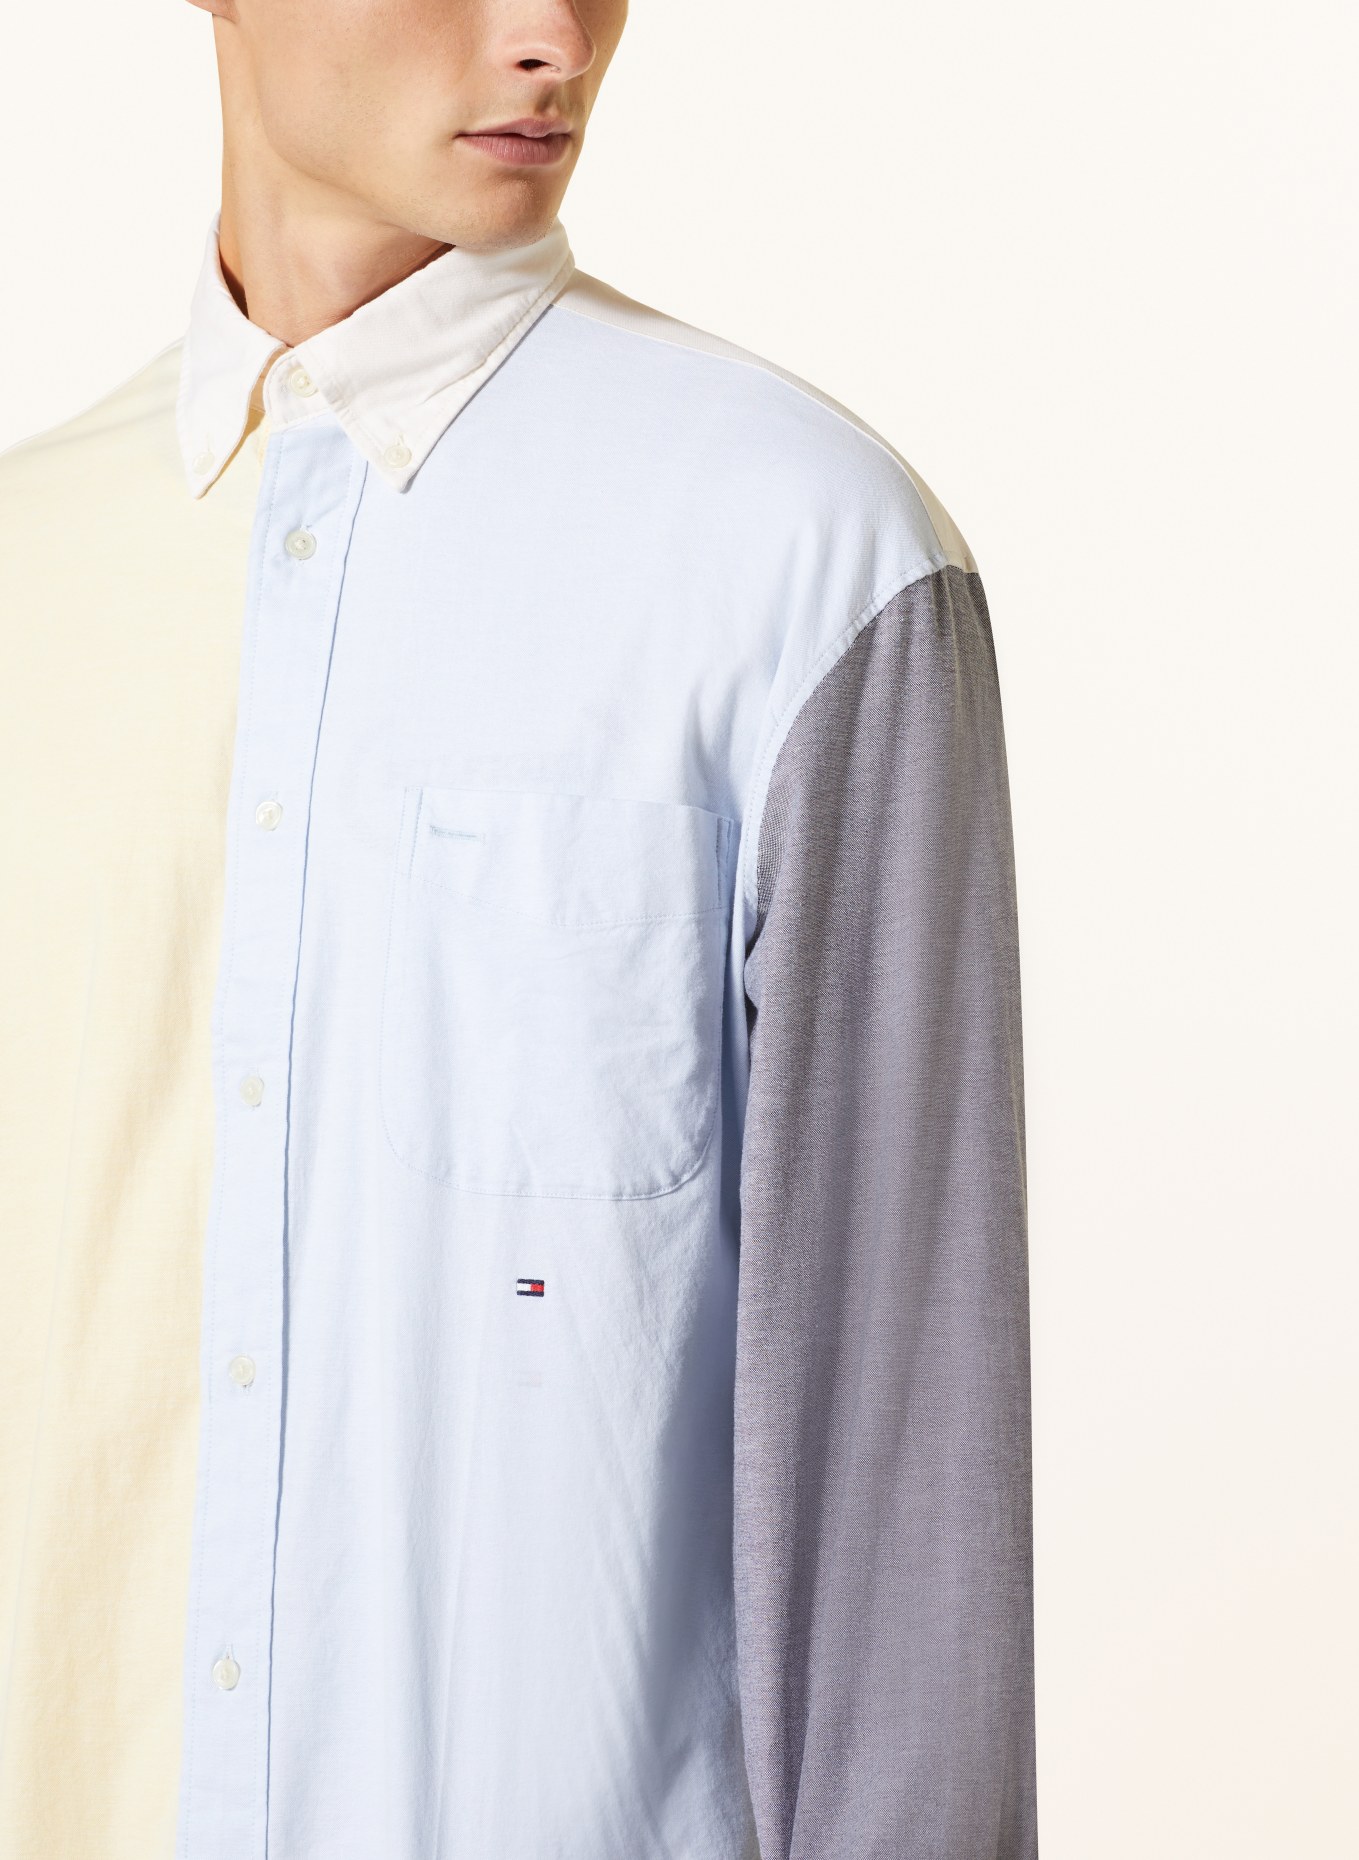 TOMMY HILFIGER Oxford shirt archive fit, Color: LIGHT YELLOW/ LIGHT BLUE/ LIGHT GRAY (Image 4)